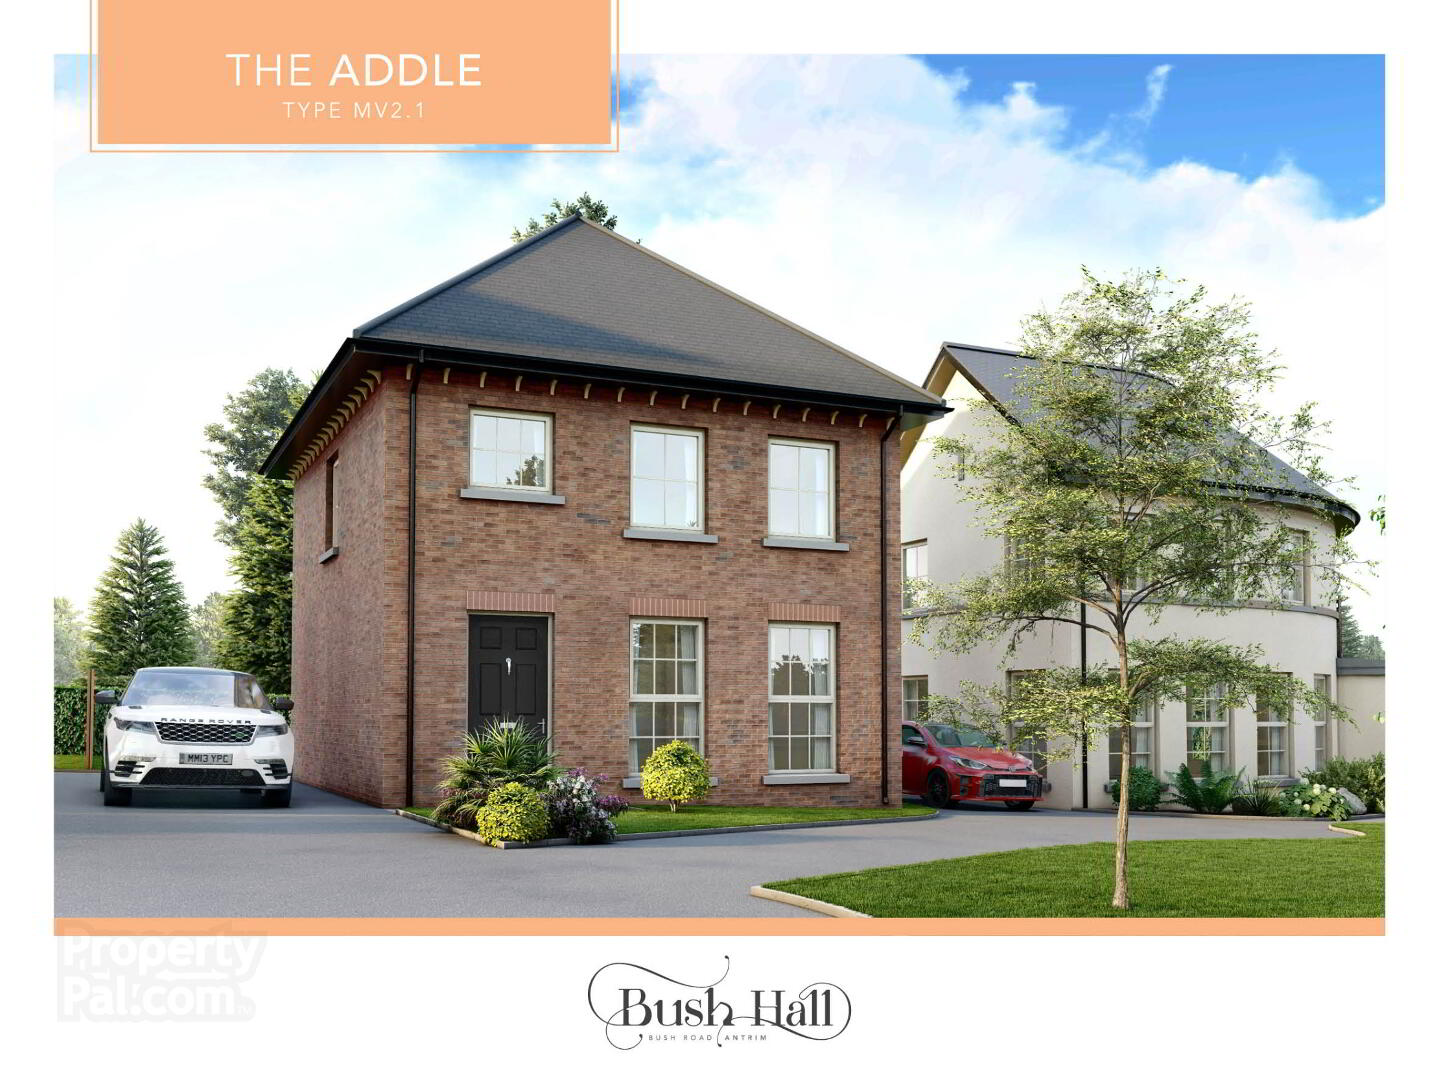 The Addle